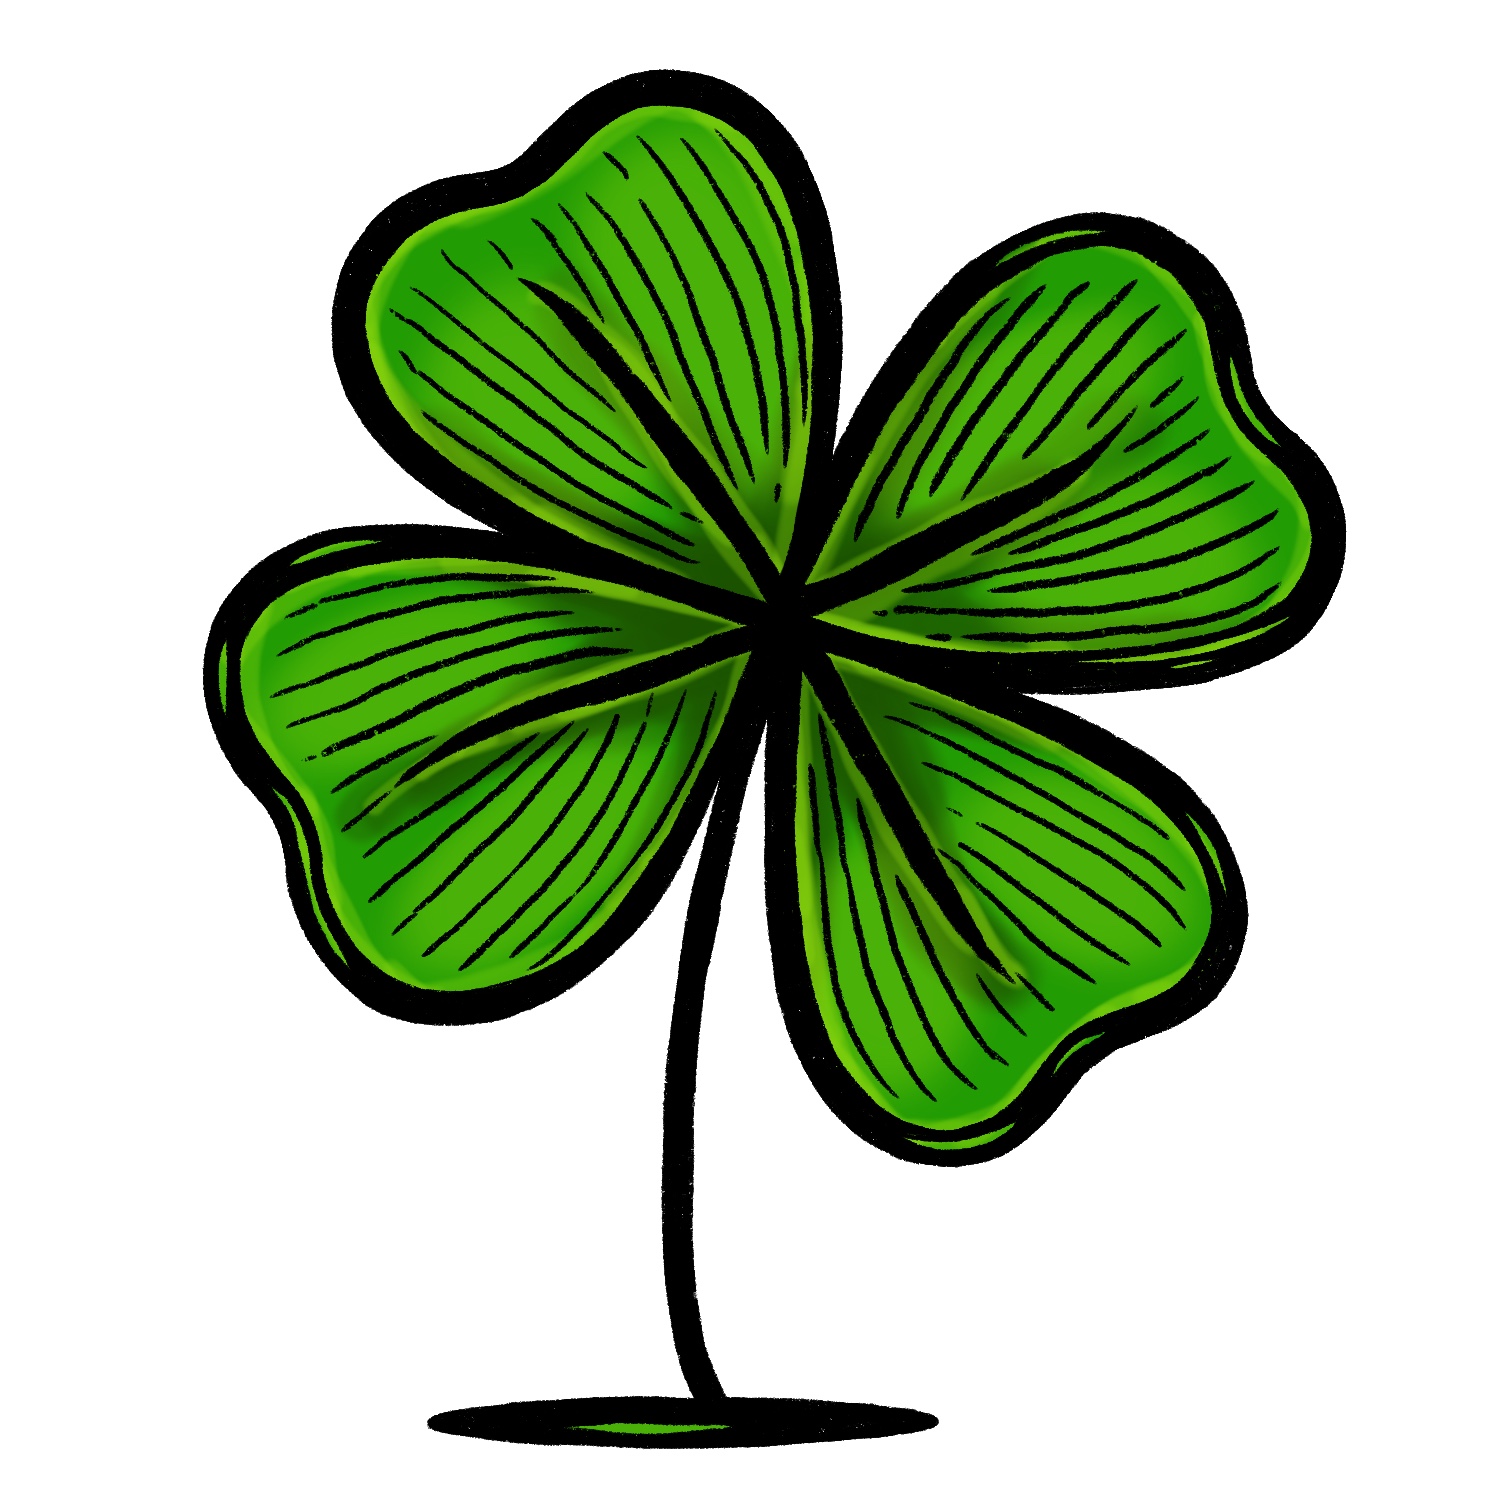 4-leaf-clover-drawing-4-easy-steps-the-graphics-fairy